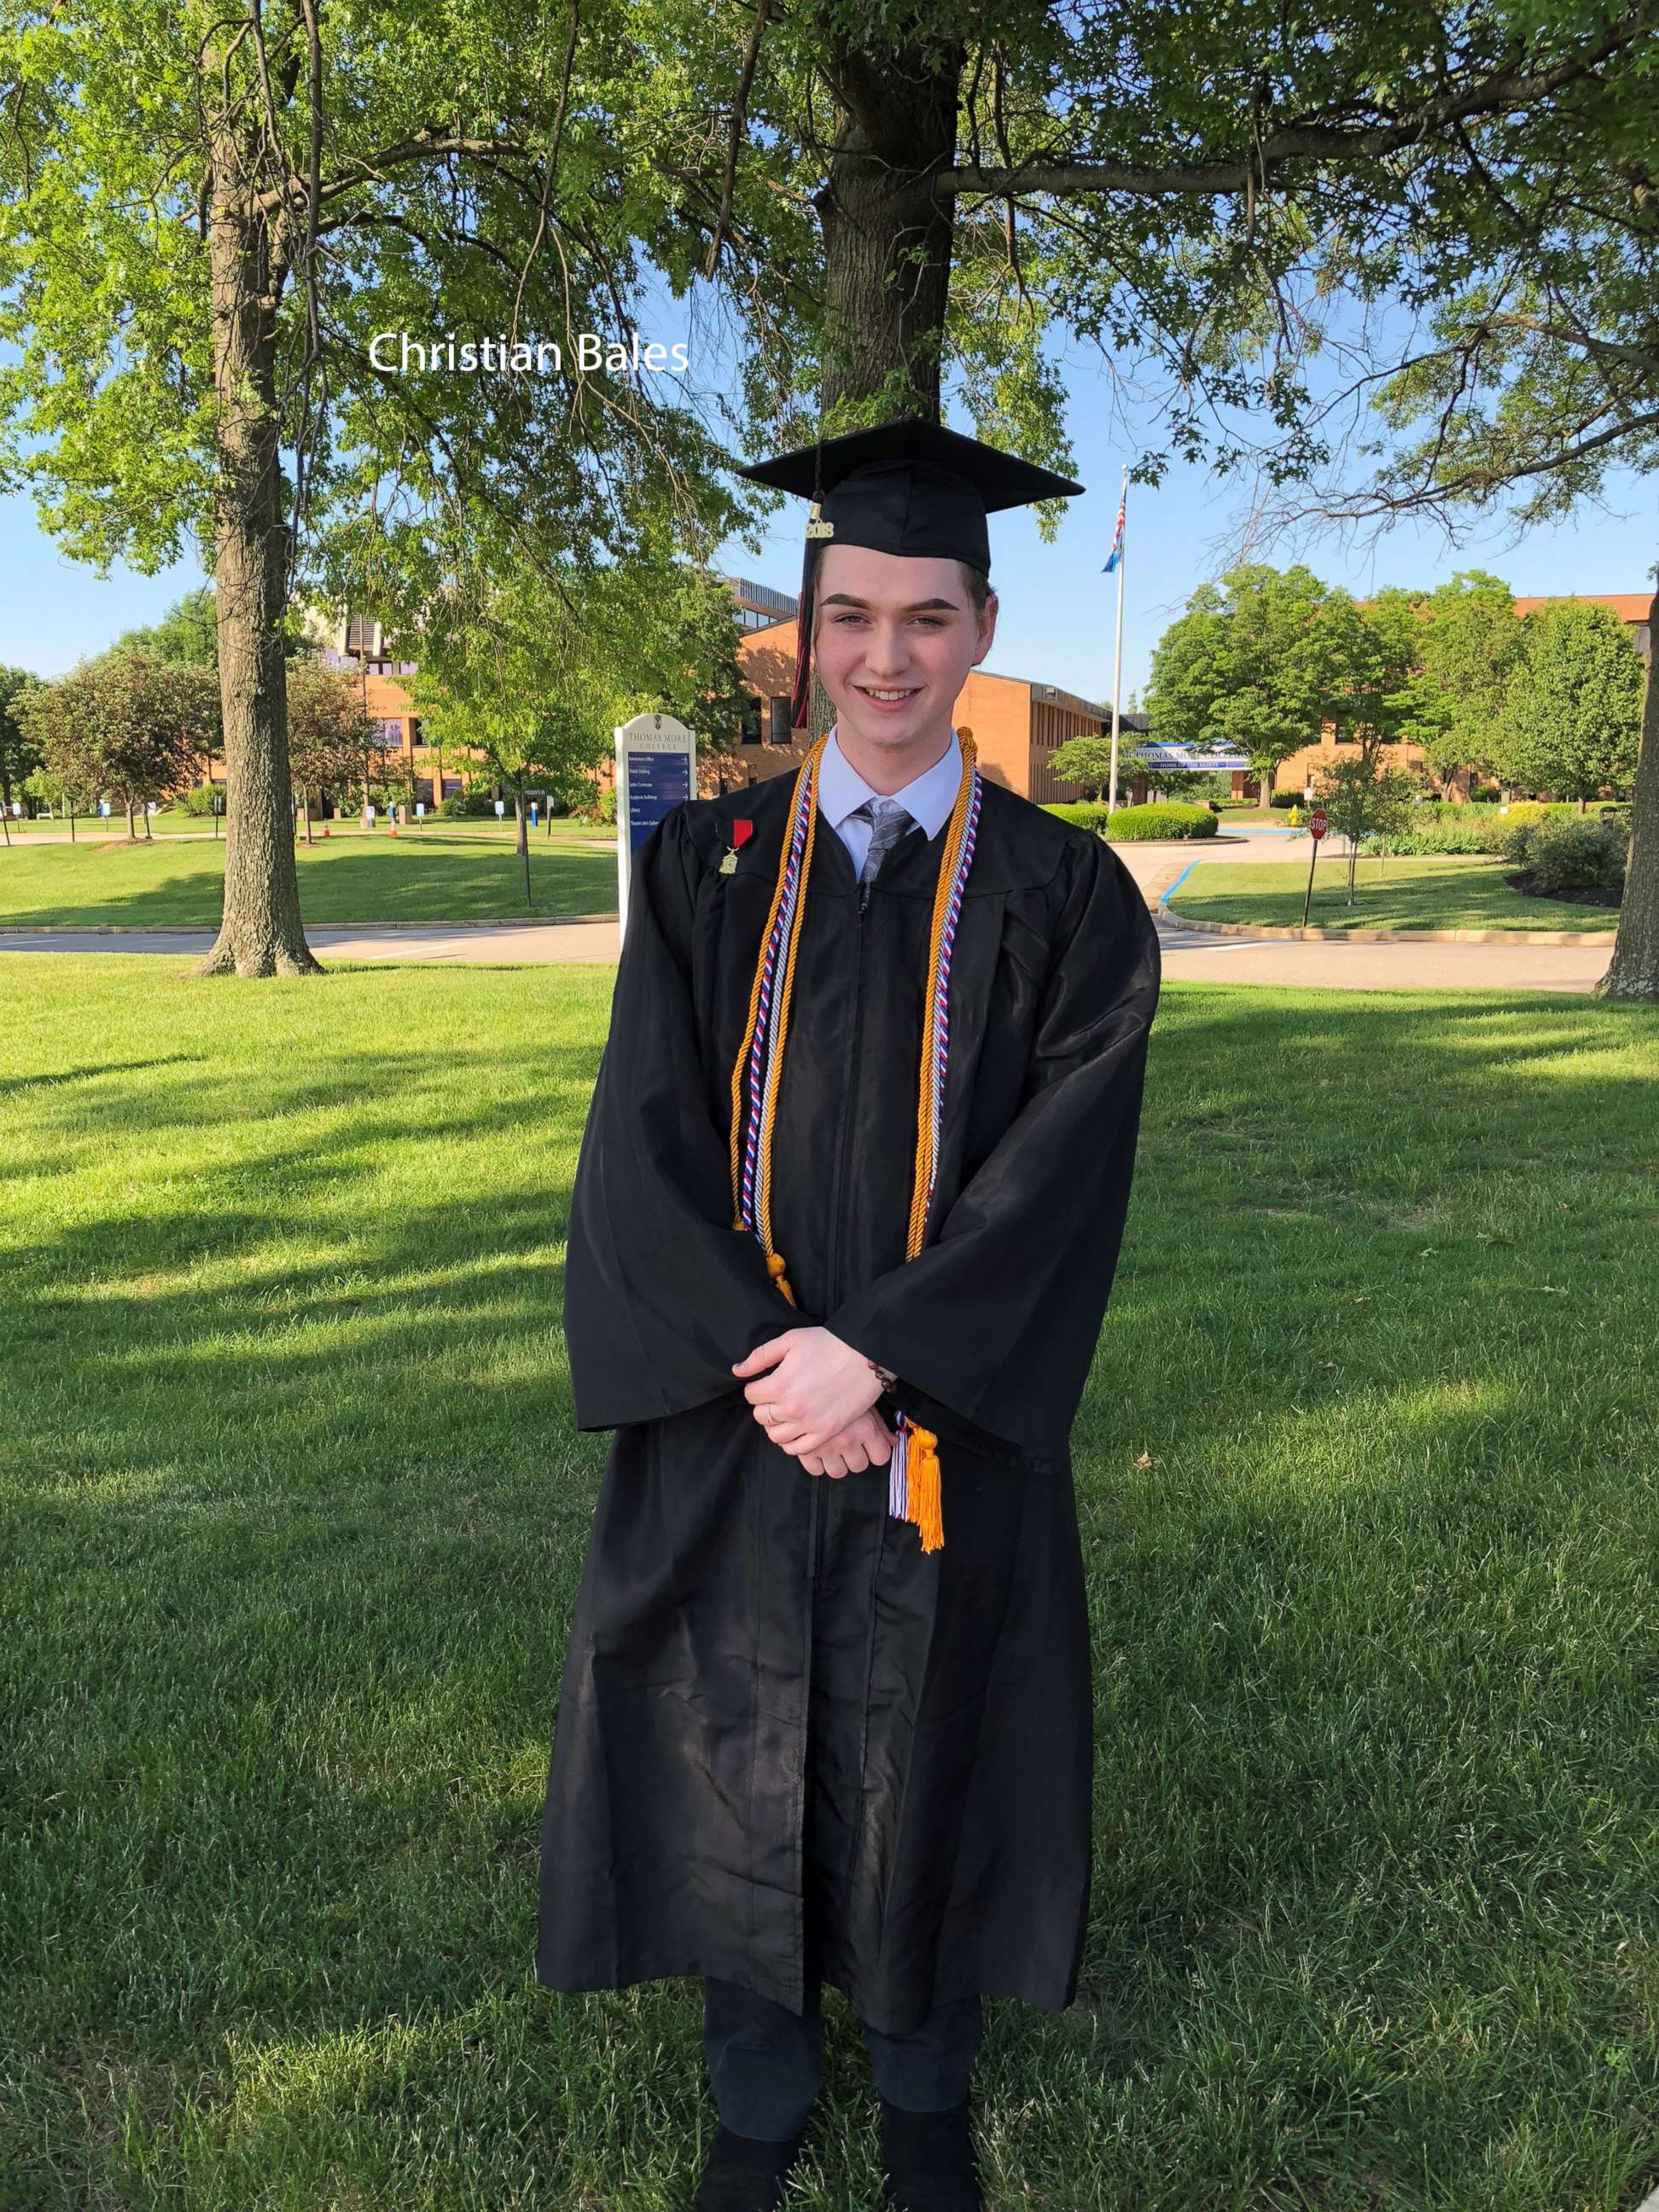 PHOTO: Holy Cross High School's graduating valedictorian and student council president Christian Bales is pictured on May 25, 2018.